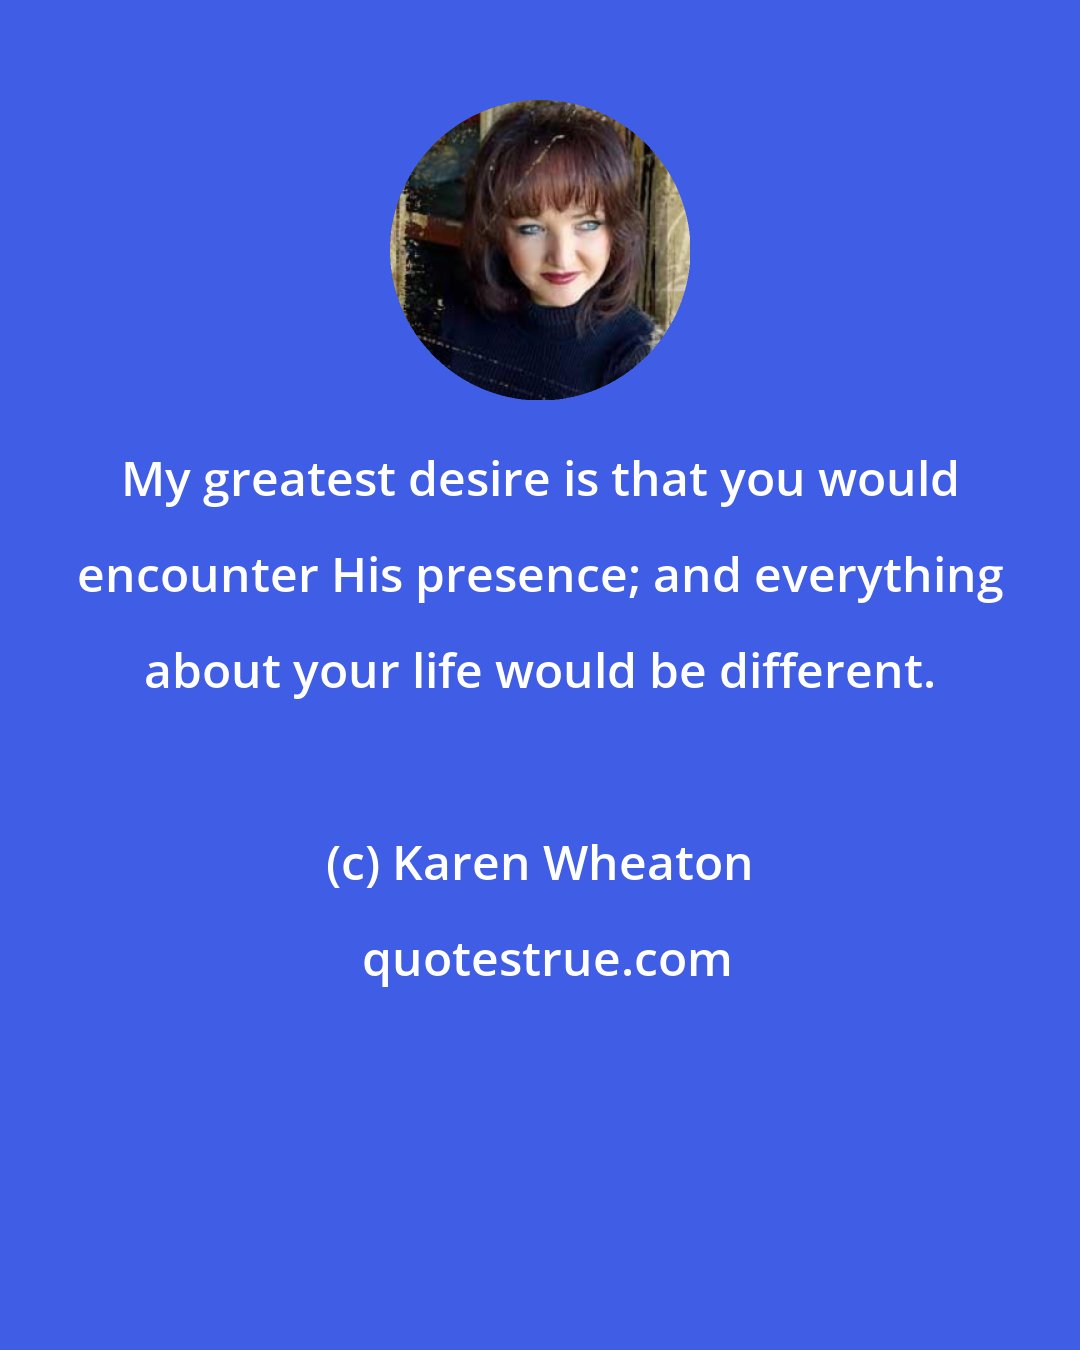 Karen Wheaton: My greatest desire is that you would encounter His presence; and everything about your life would be different.